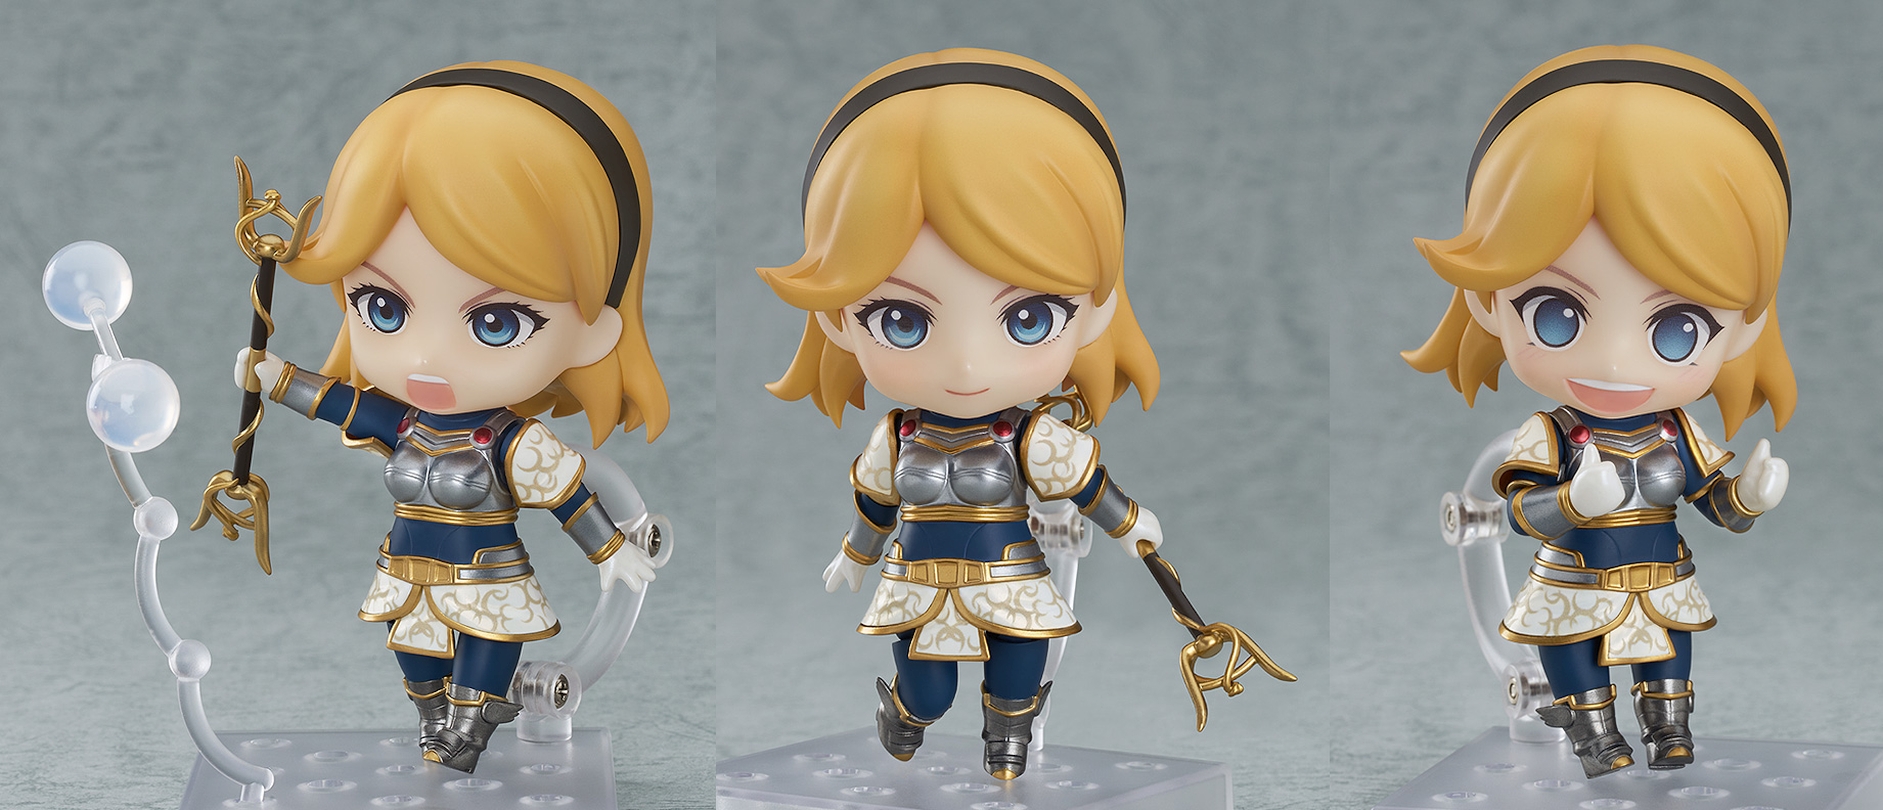 Good Smile Company’s League of Legends Nendoroid Lux Now Ready For Preorder